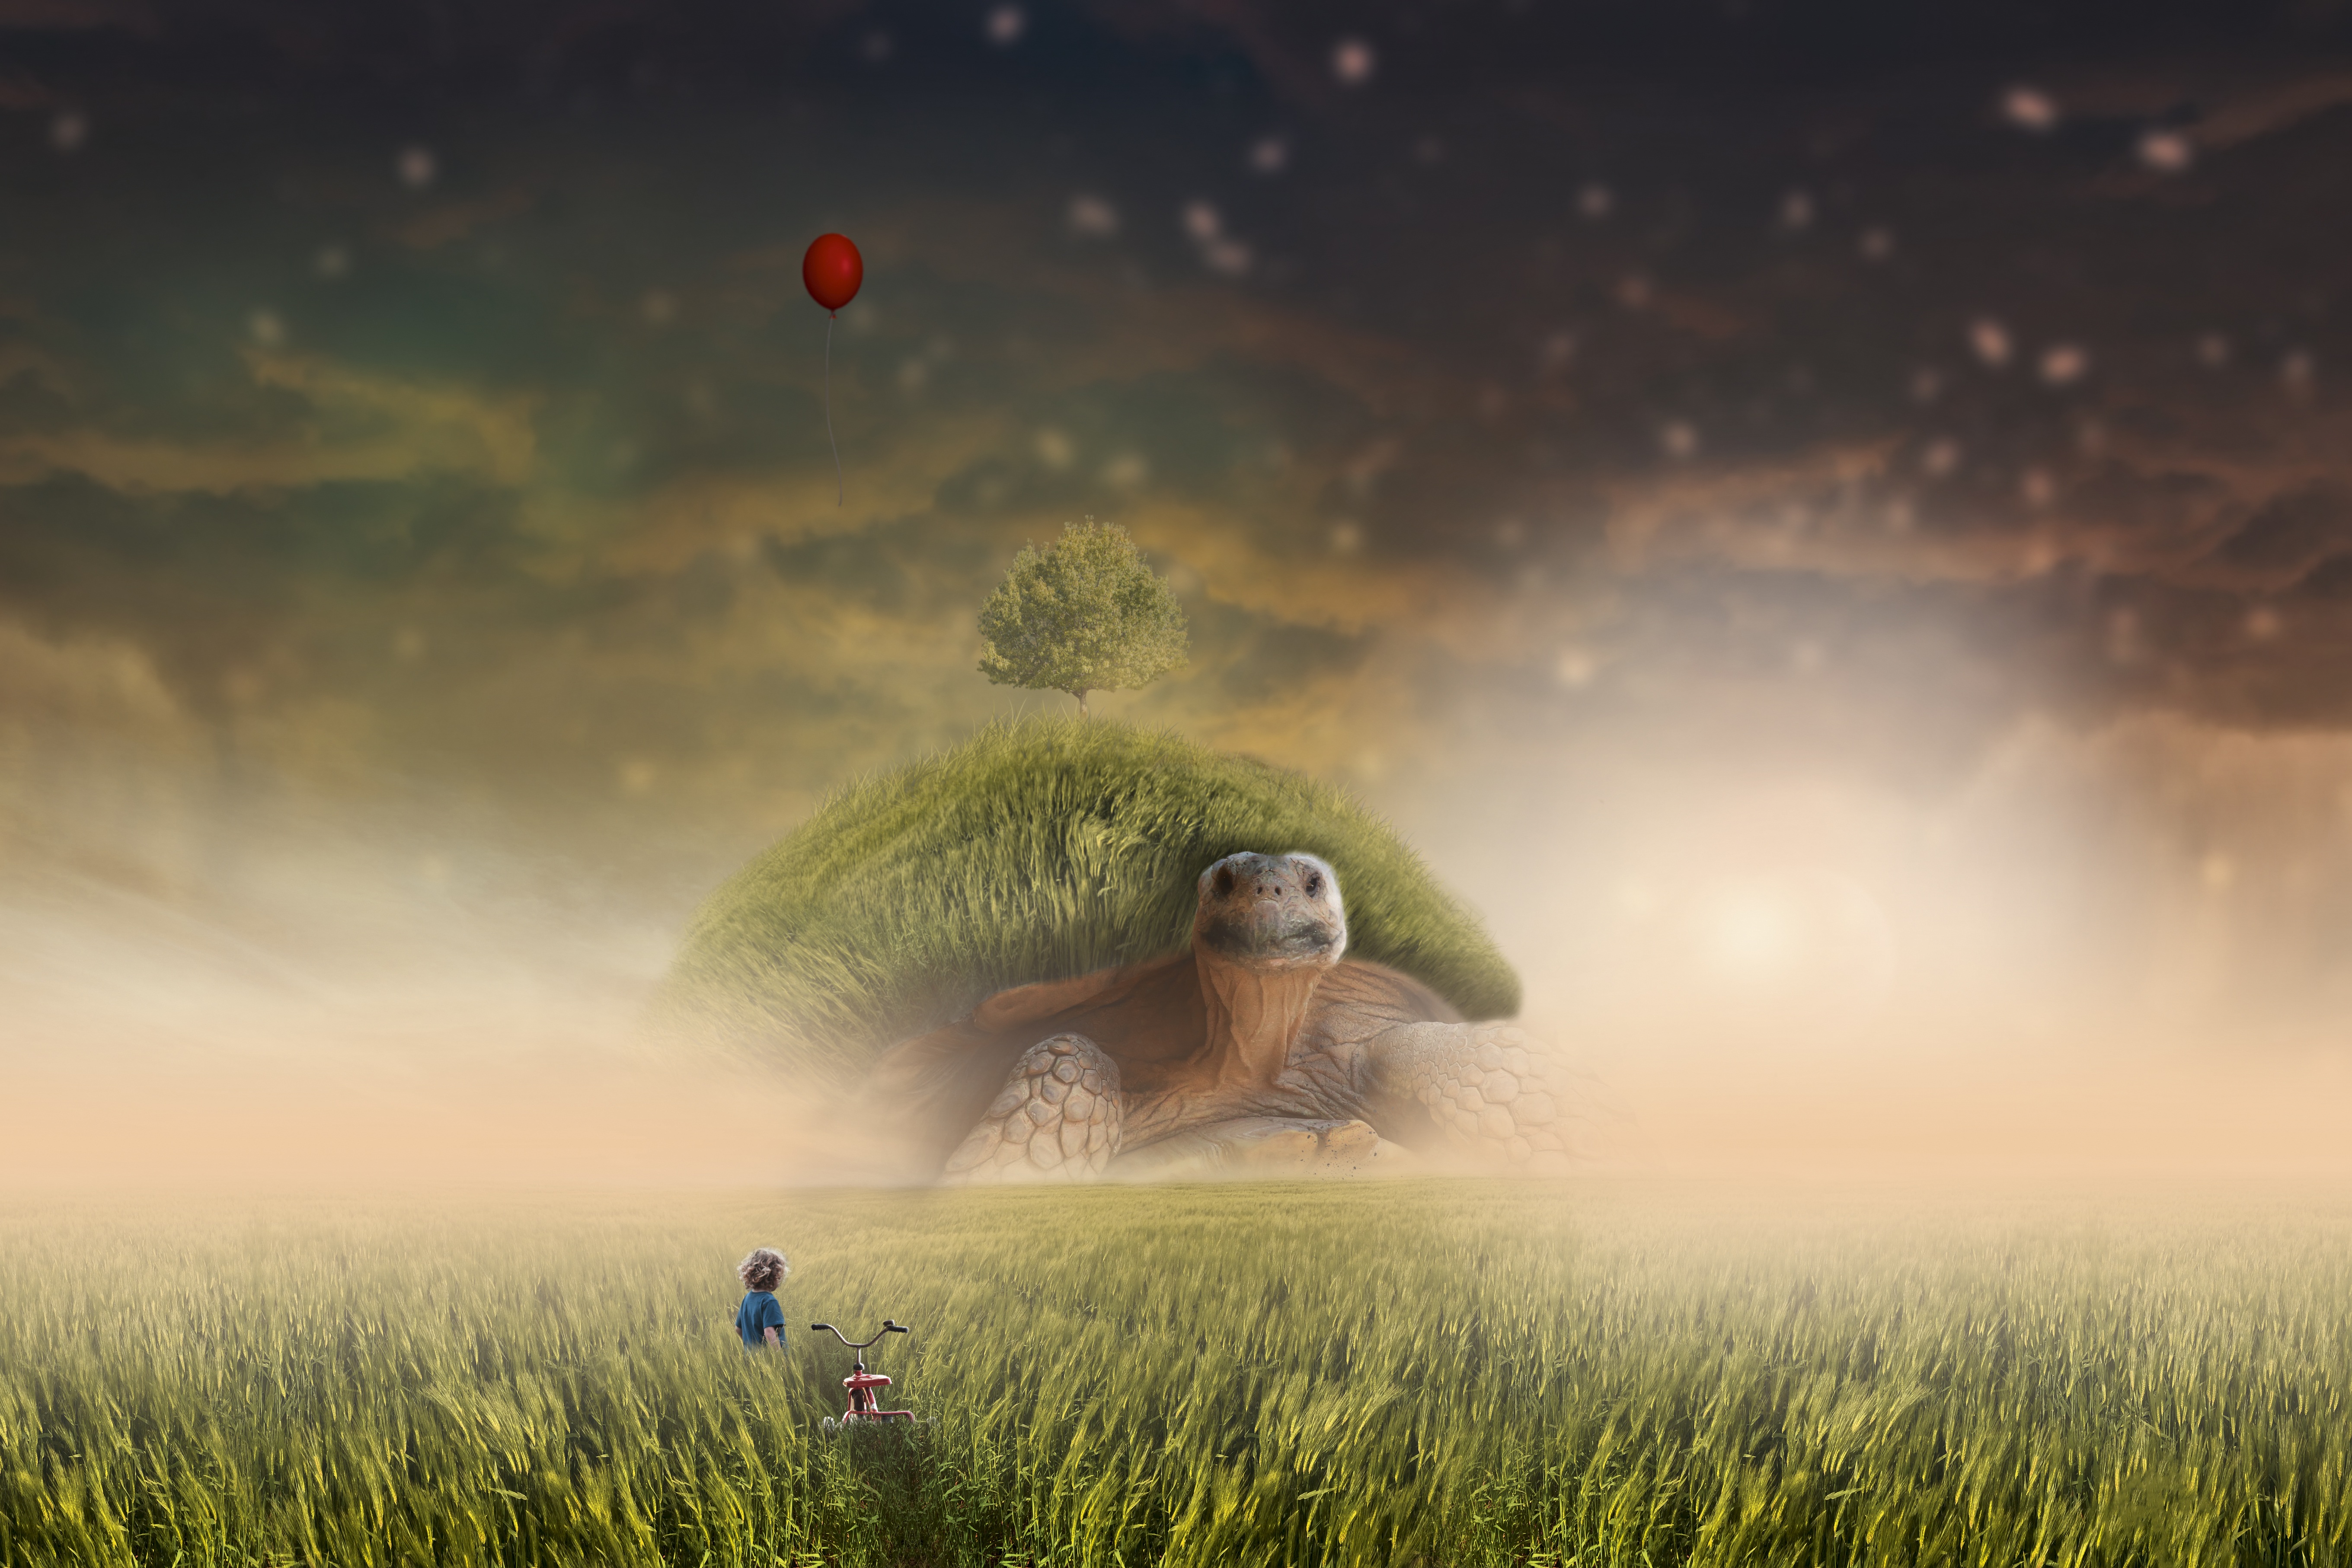 turtle, grass, bicycle, field, photoshop, child, art images